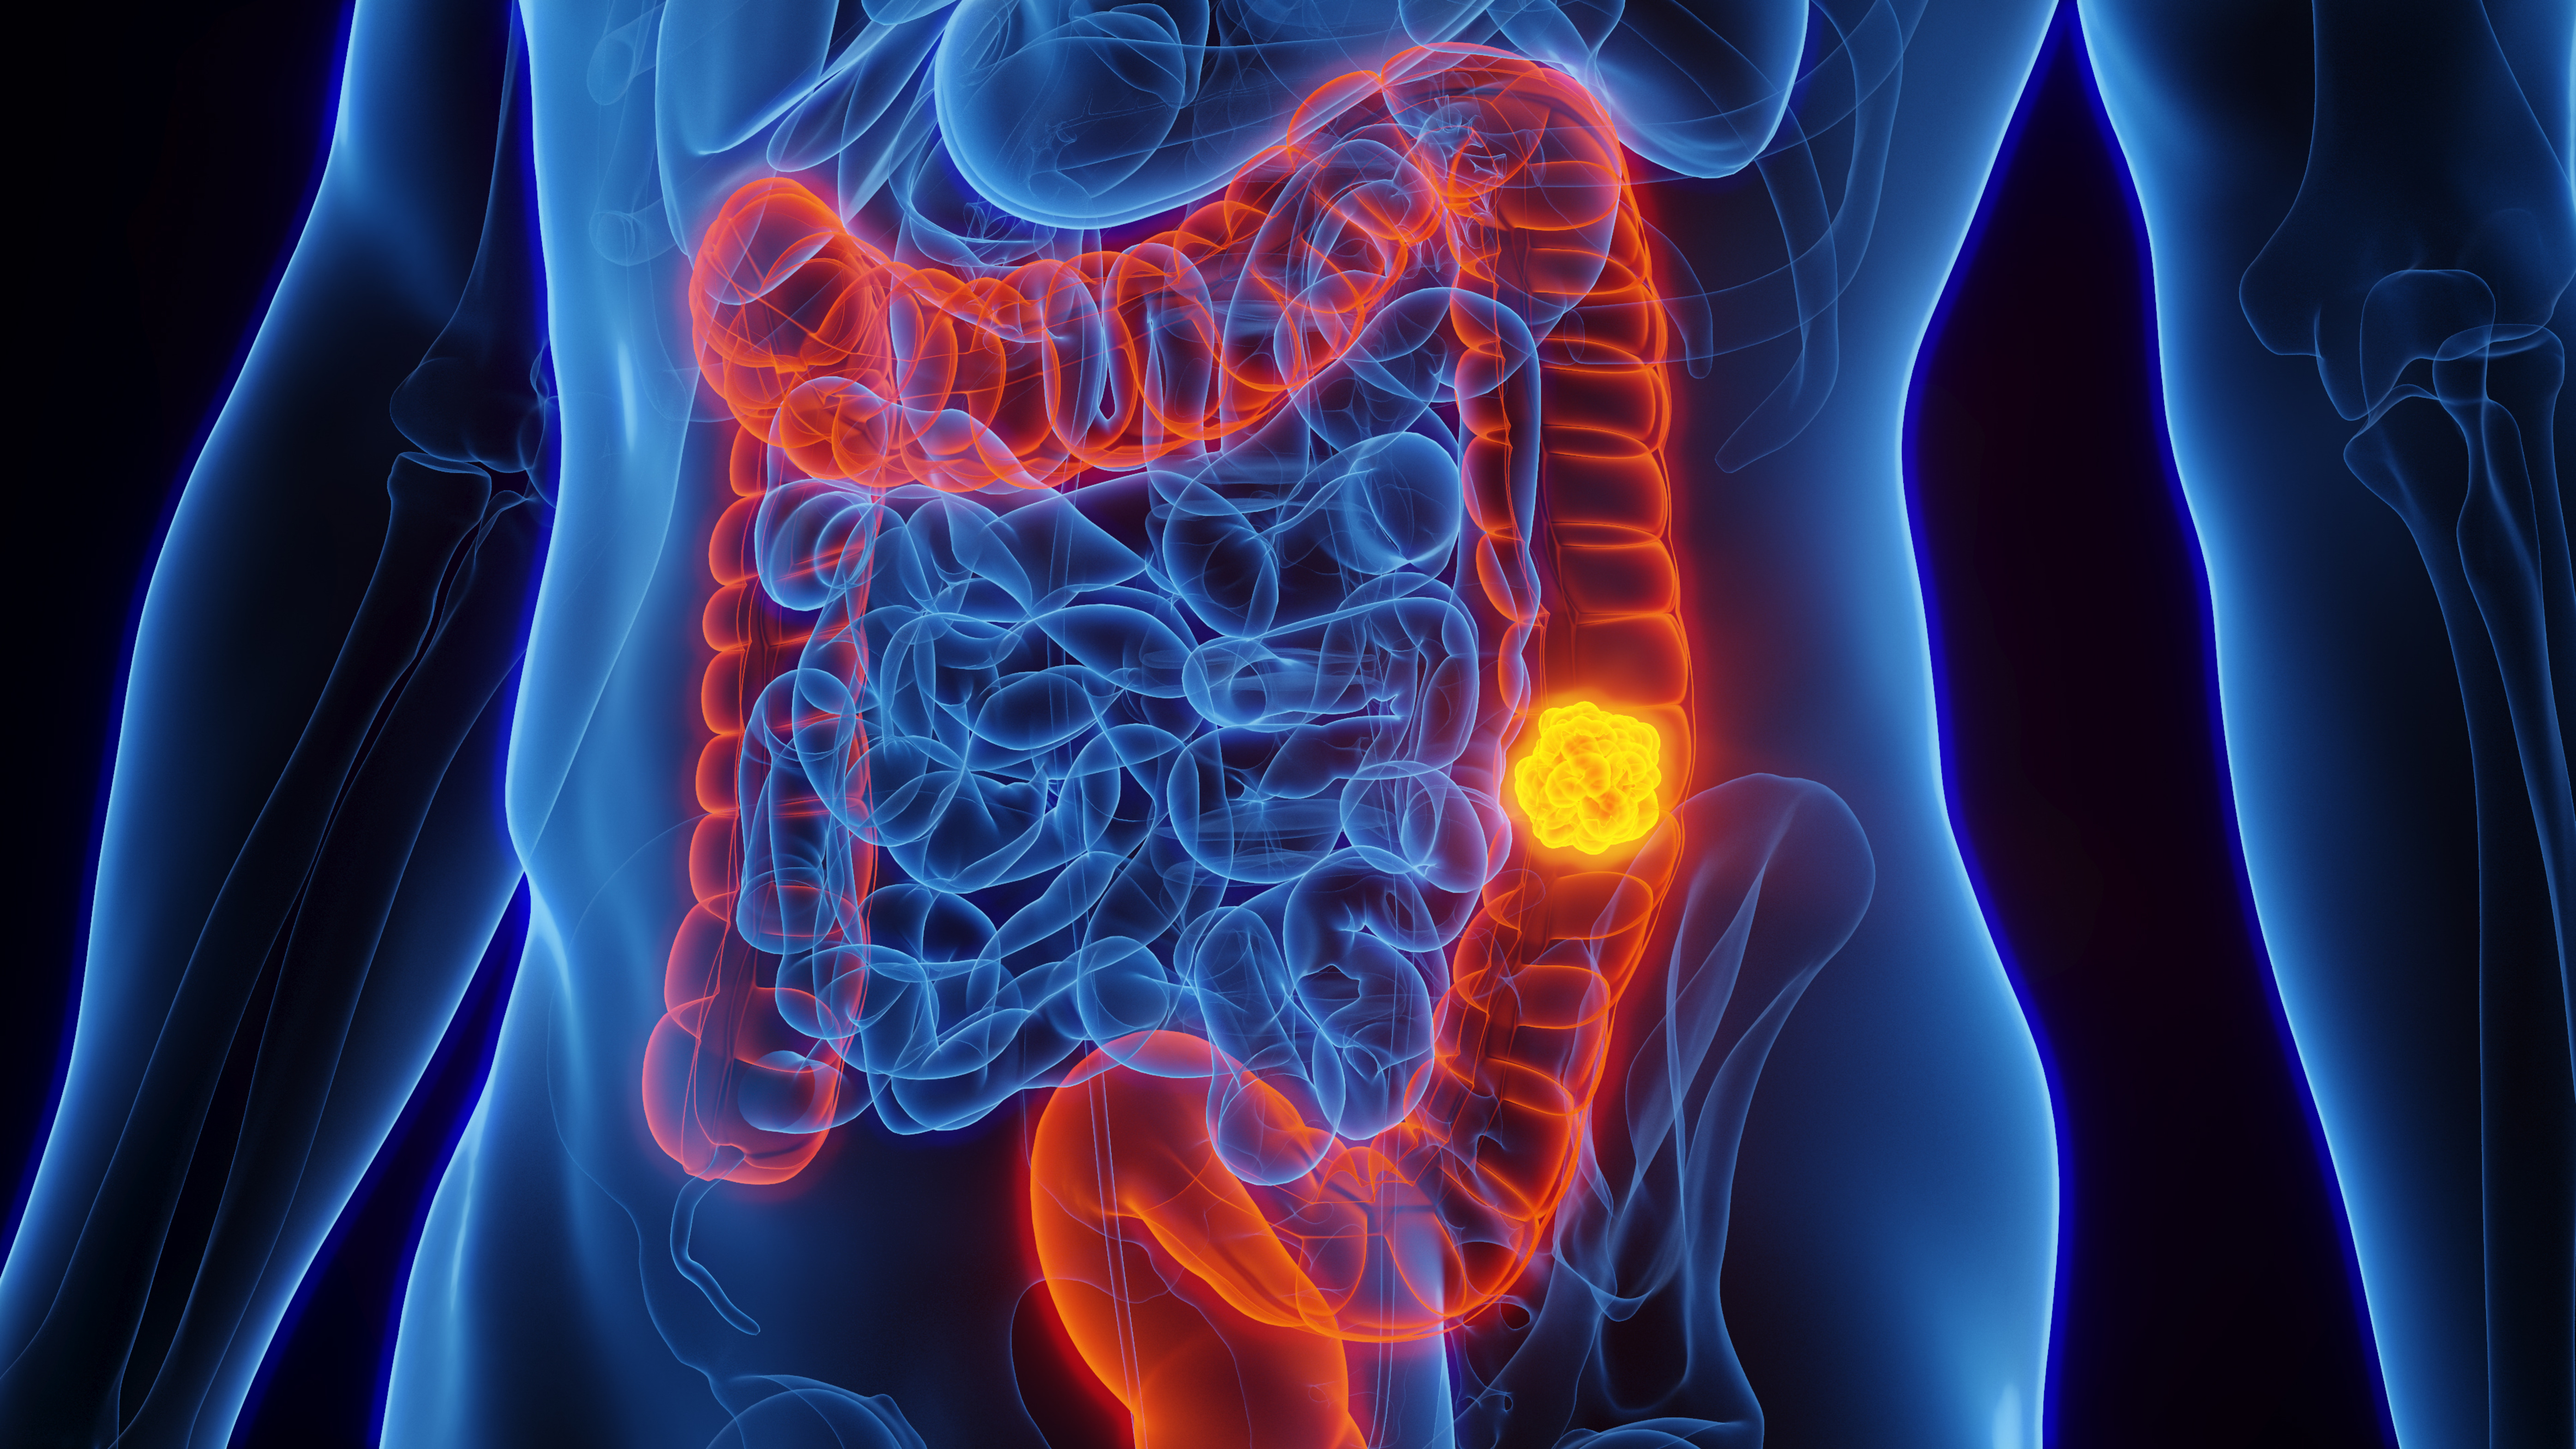 Drug for cocaine addiction could help treat colorectal cancer, research shows